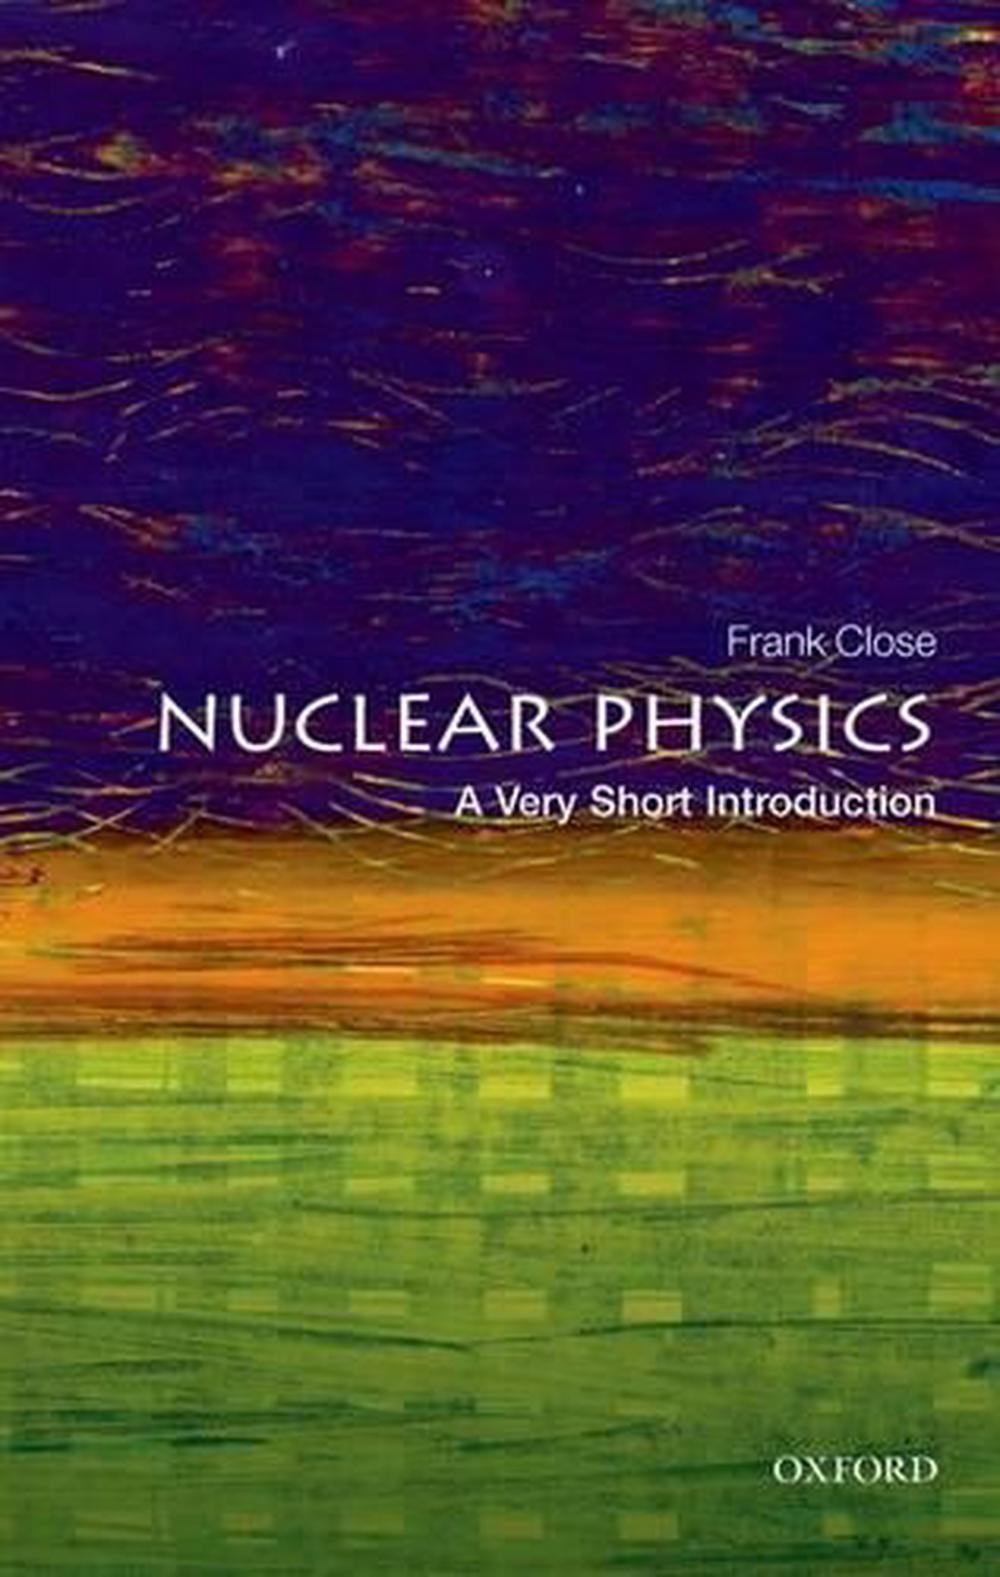 book about nuclear time trvel